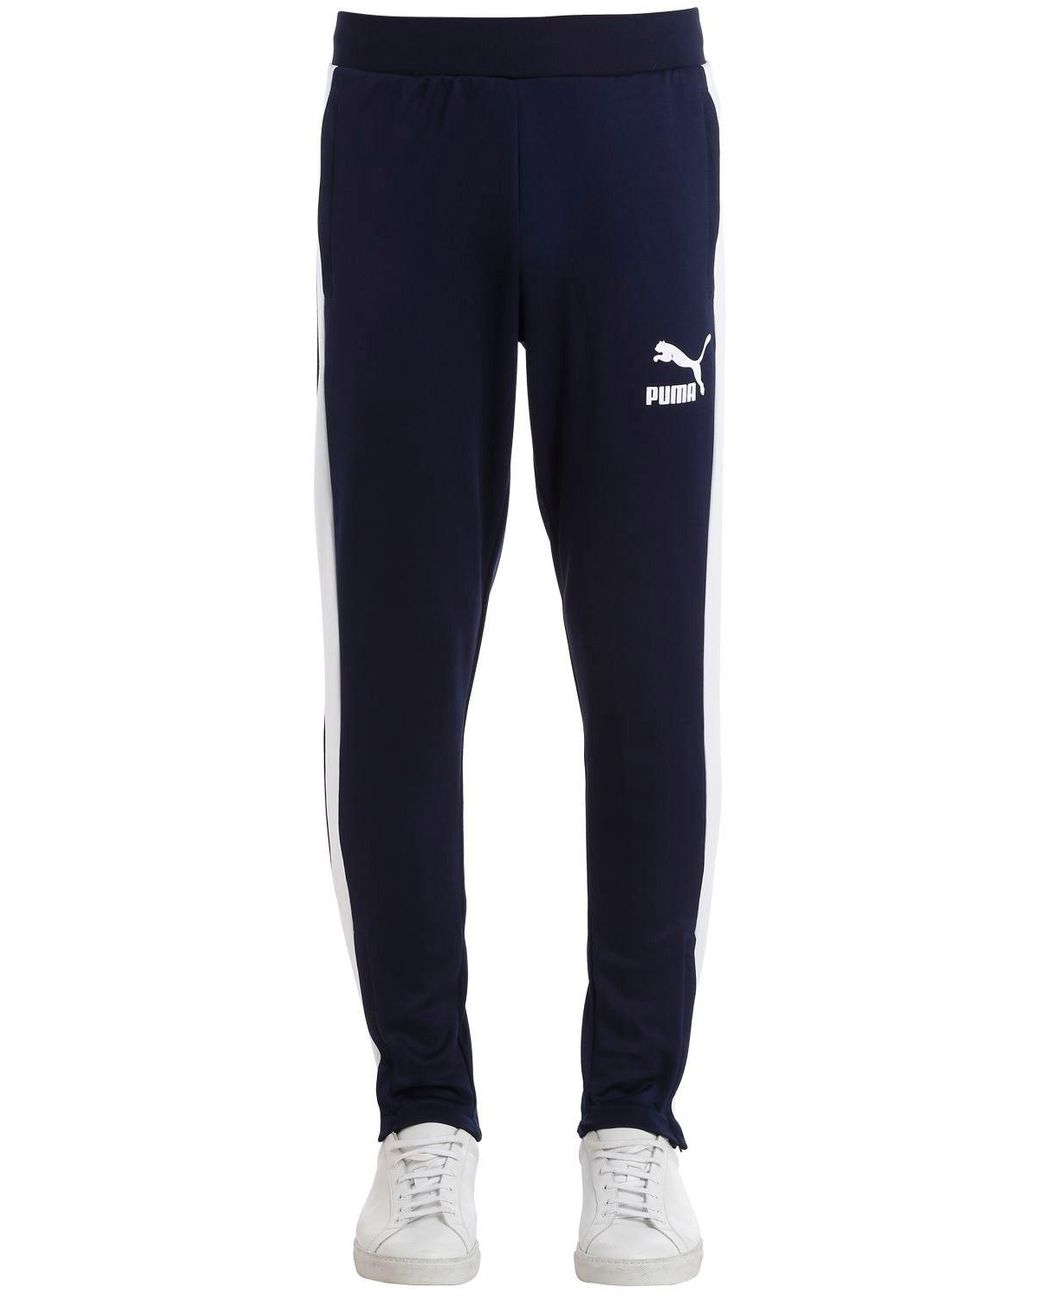 Select Oxford Sweatpants › Navy blue (630045) › 3 Colors › Clothing › Golf